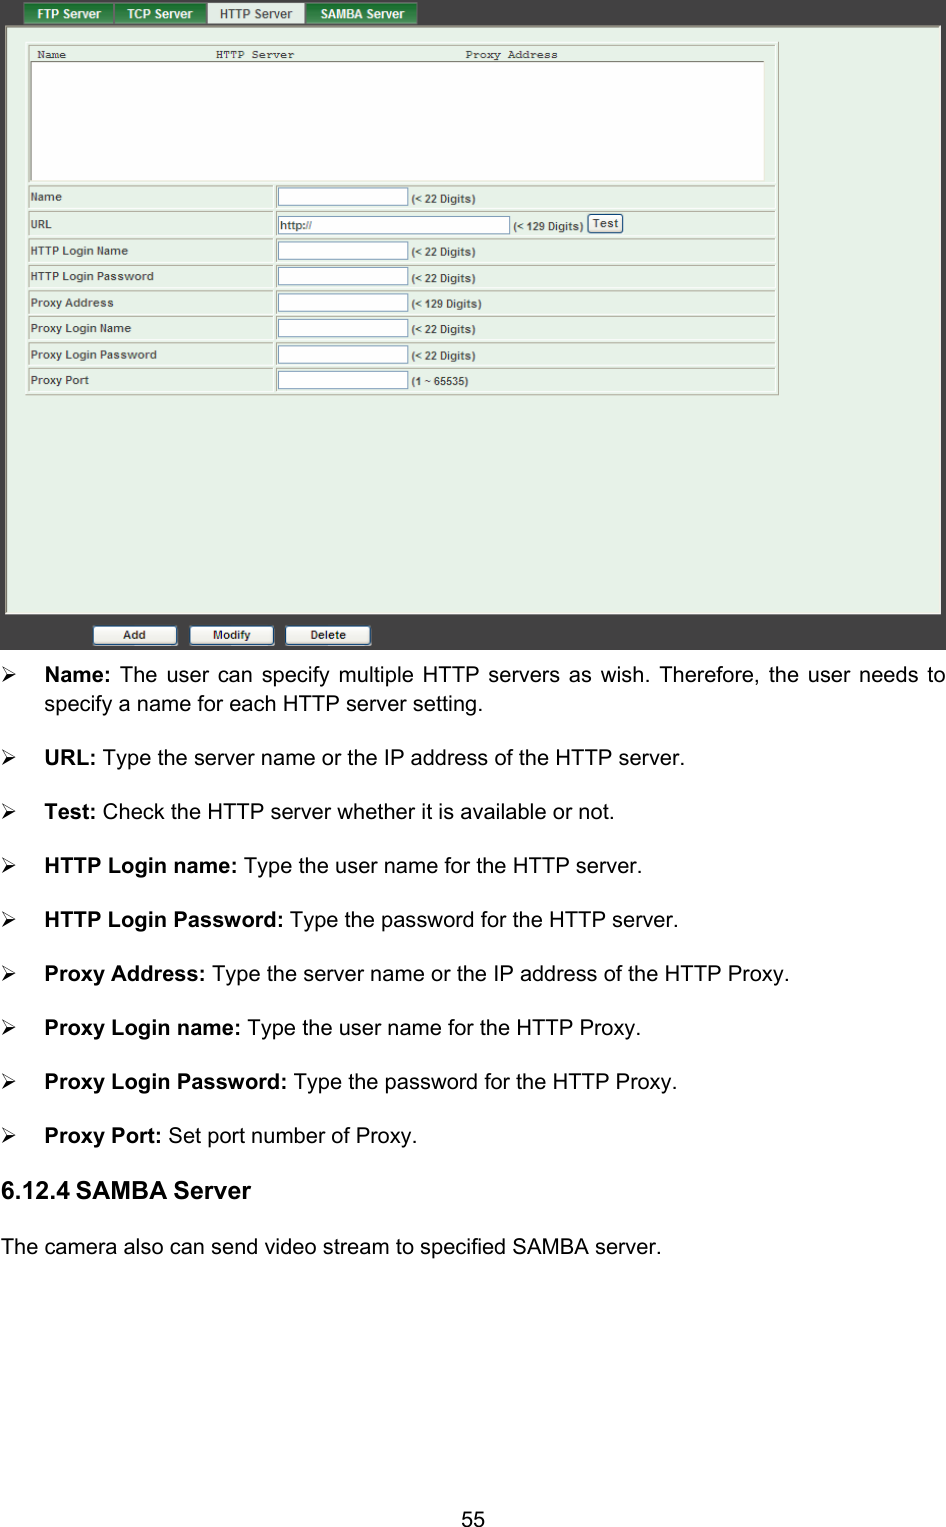  55  ¾ Name:  The user can specify multiple HTTP servers as wish. Therefore, the user needs to specify a name for each HTTP server setting.   ¾ URL: Type the server name or the IP address of the HTTP server.   ¾ Test: Check the HTTP server whether it is available or not.   ¾ HTTP Login name: Type the user name for the HTTP server.   ¾ HTTP Login Password: Type the password for the HTTP server.   ¾ Proxy Address: Type the server name or the IP address of the HTTP Proxy.   ¾ Proxy Login name: Type the user name for the HTTP Proxy.   ¾ Proxy Login Password: Type the password for the HTTP Proxy.   ¾ Proxy Port: Set port number of Proxy.   6.12.4 SAMBA Server The camera also can send video stream to specified SAMBA server. 